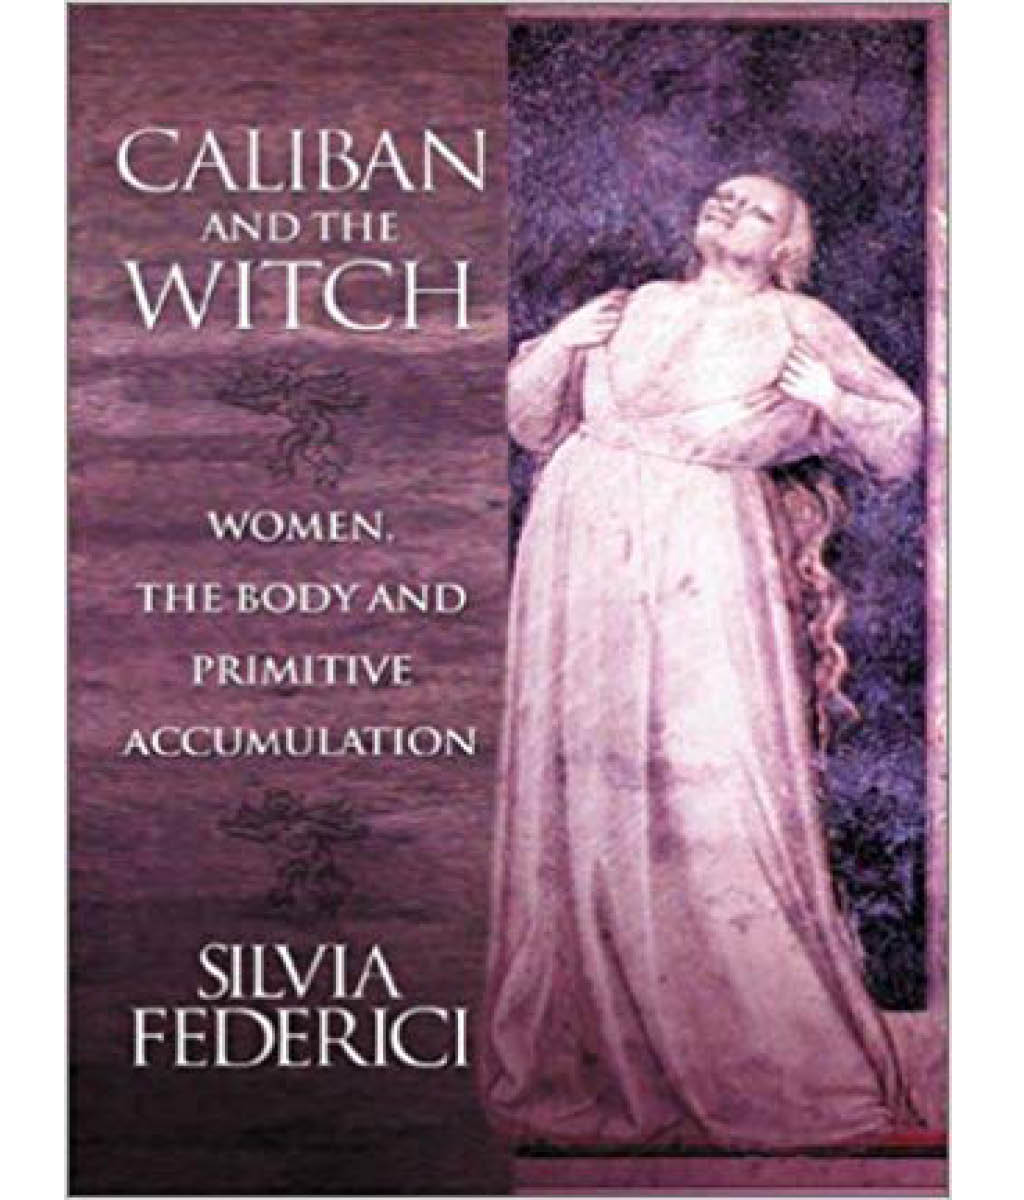 The Caliban and the Witch Silvia Federici